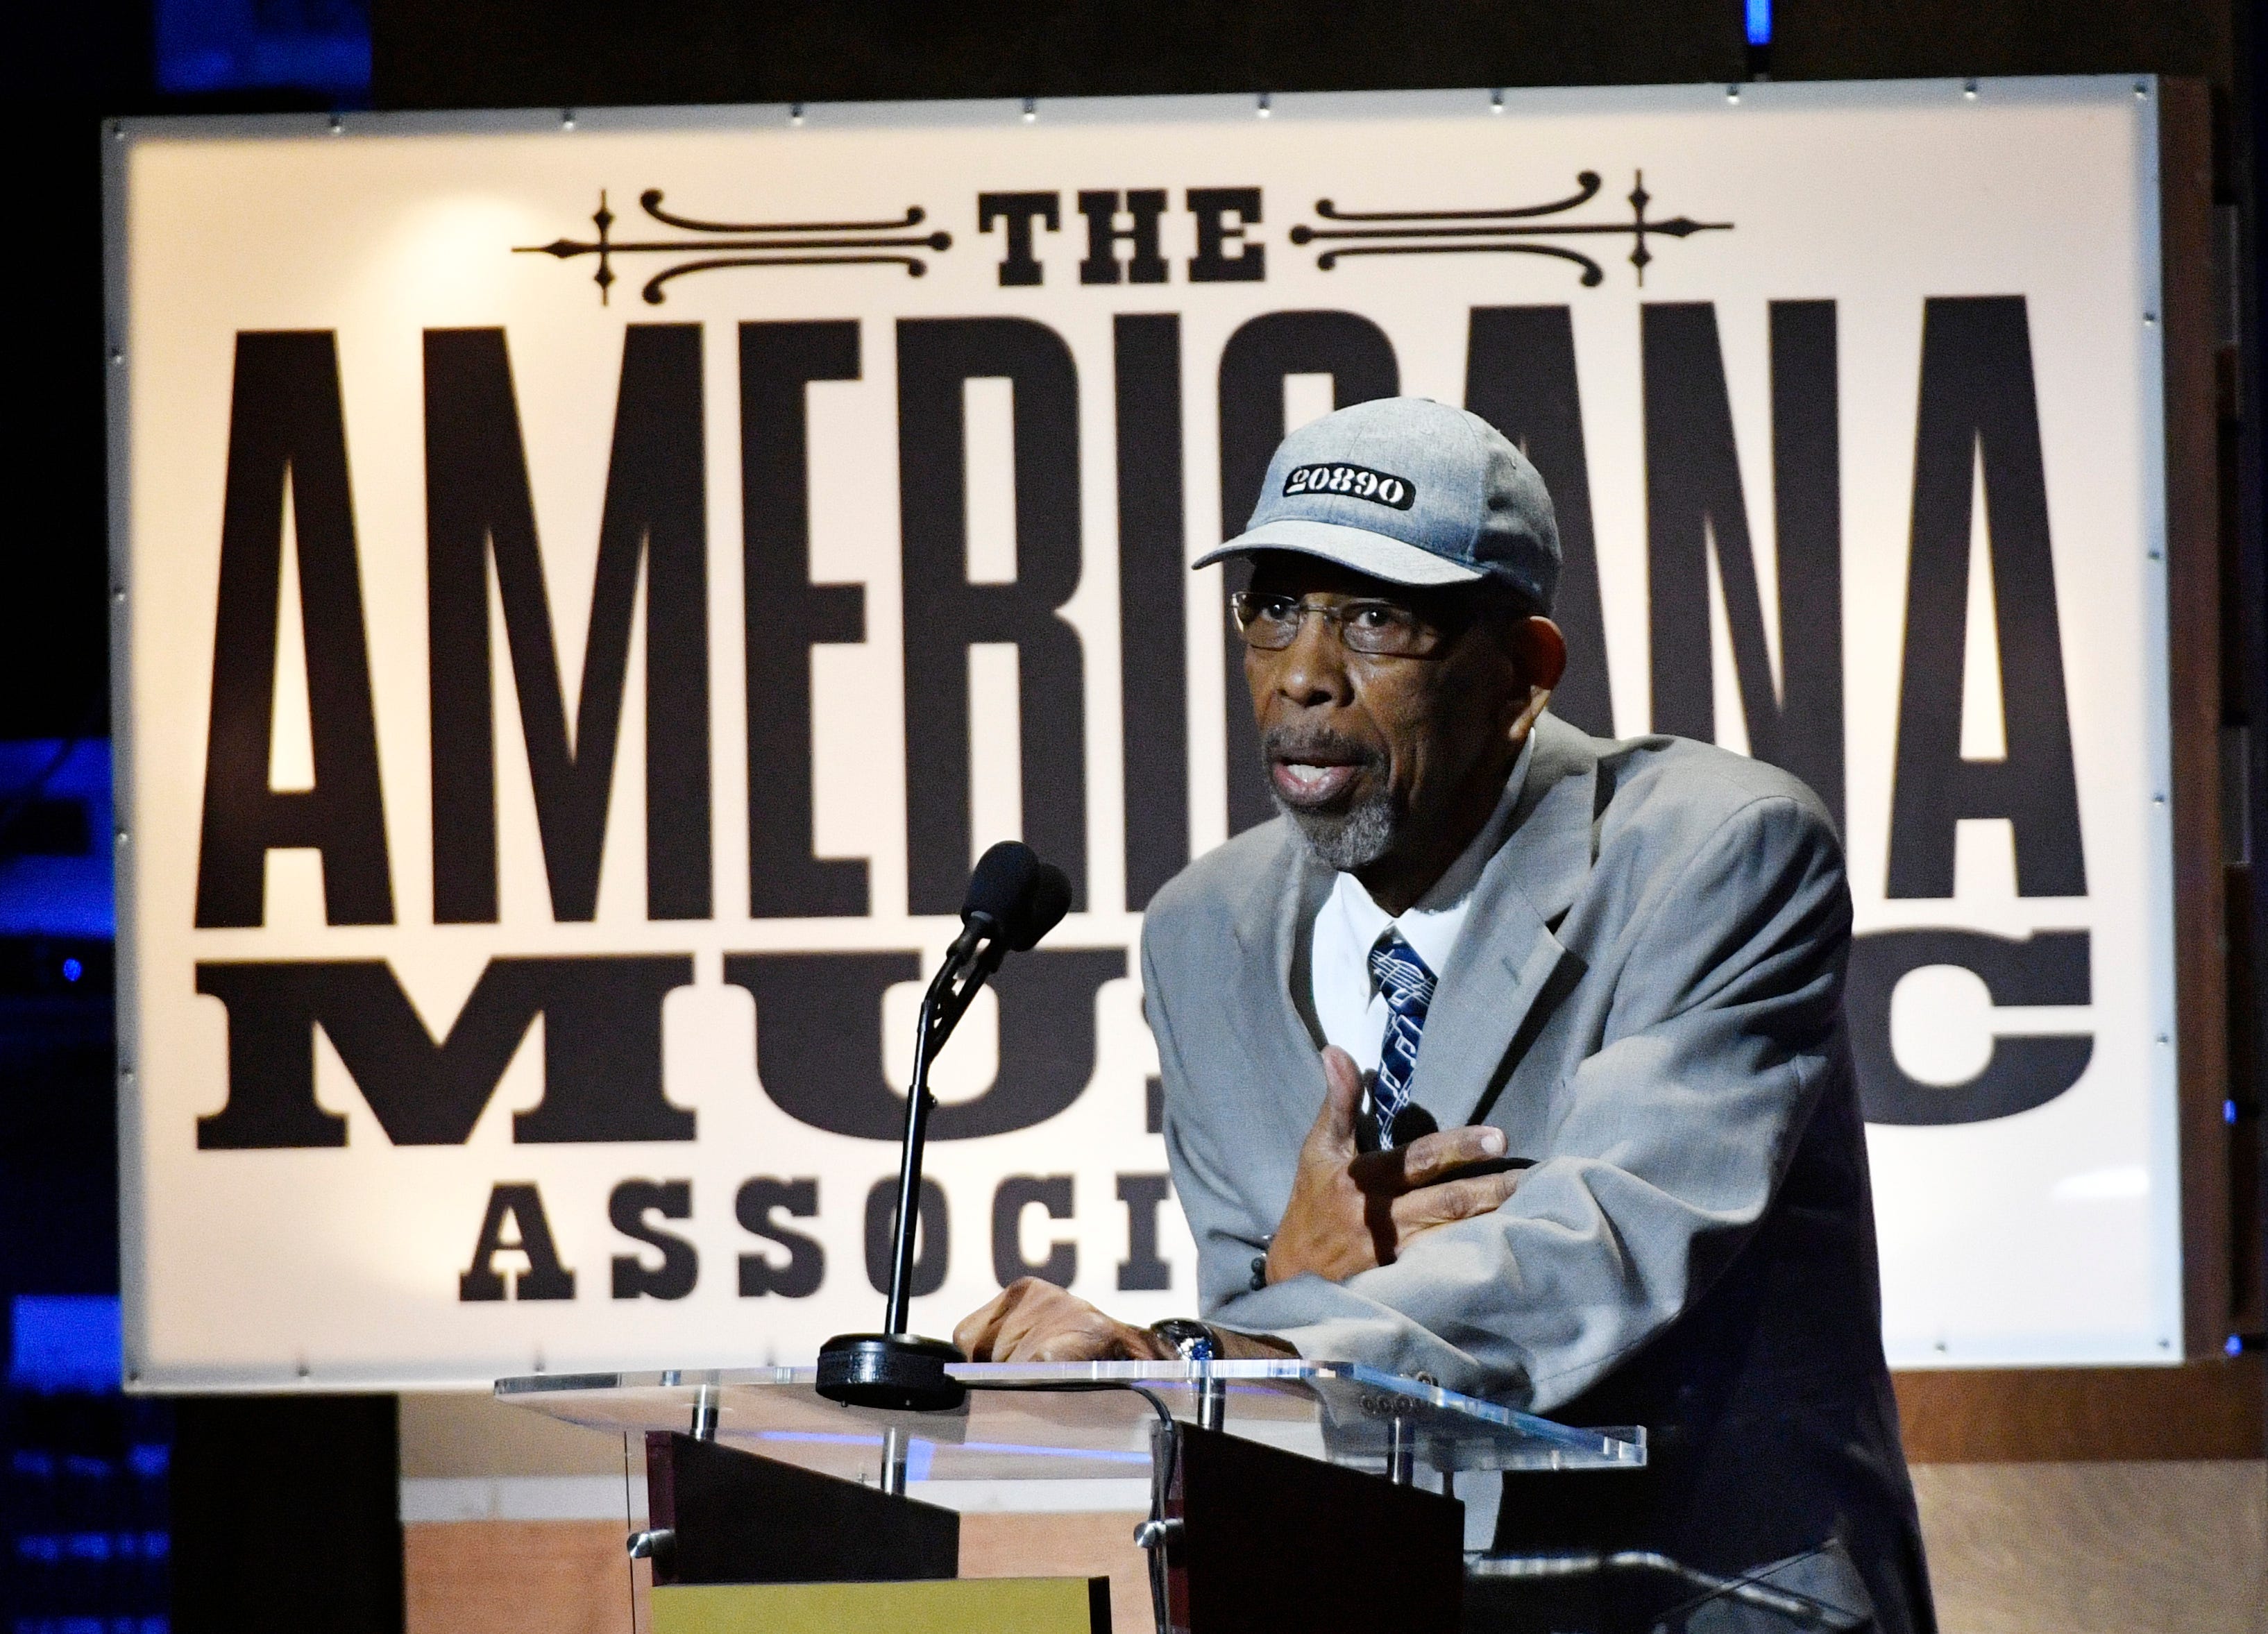 Ernest "Rip" Patton accepts the Inspiration Award at the Americana Music Honors & Awards on Sept. 11, 2019, at the Ryman Auditorium in Nashville, Tenn.